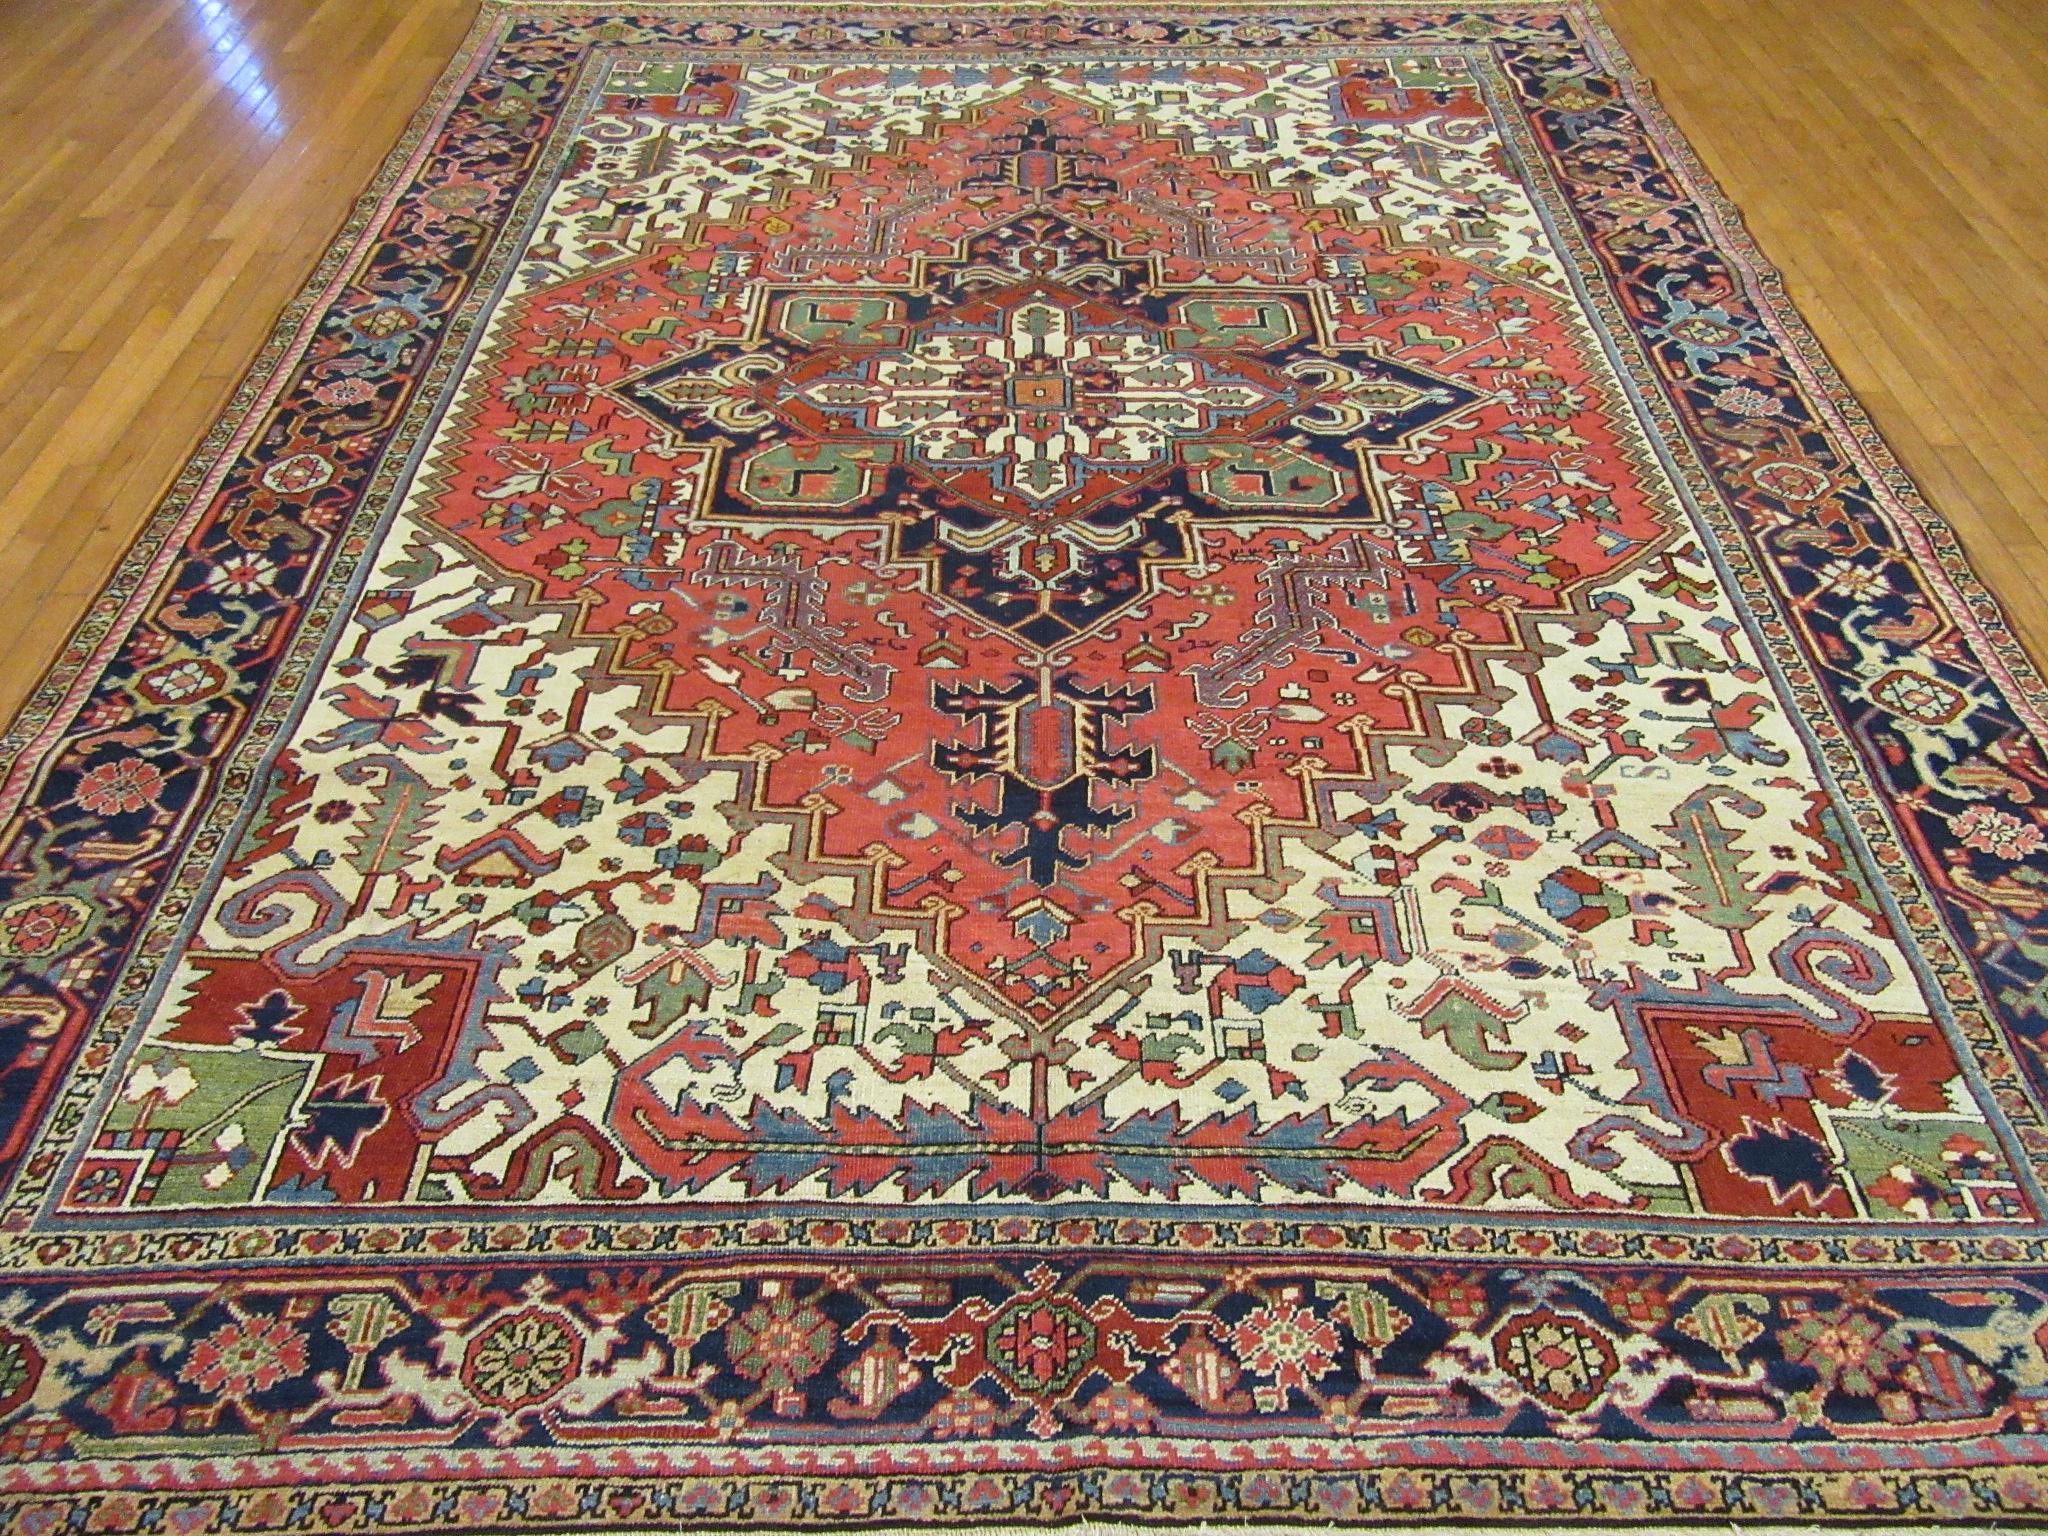 This is a large antique hand knotted rug from the Infamous village of Heriz in northwest of Iran (Persian).
This rug has the primary colors and geometric design made with wool and natural dyes. A very useful size for your home or office. It measure